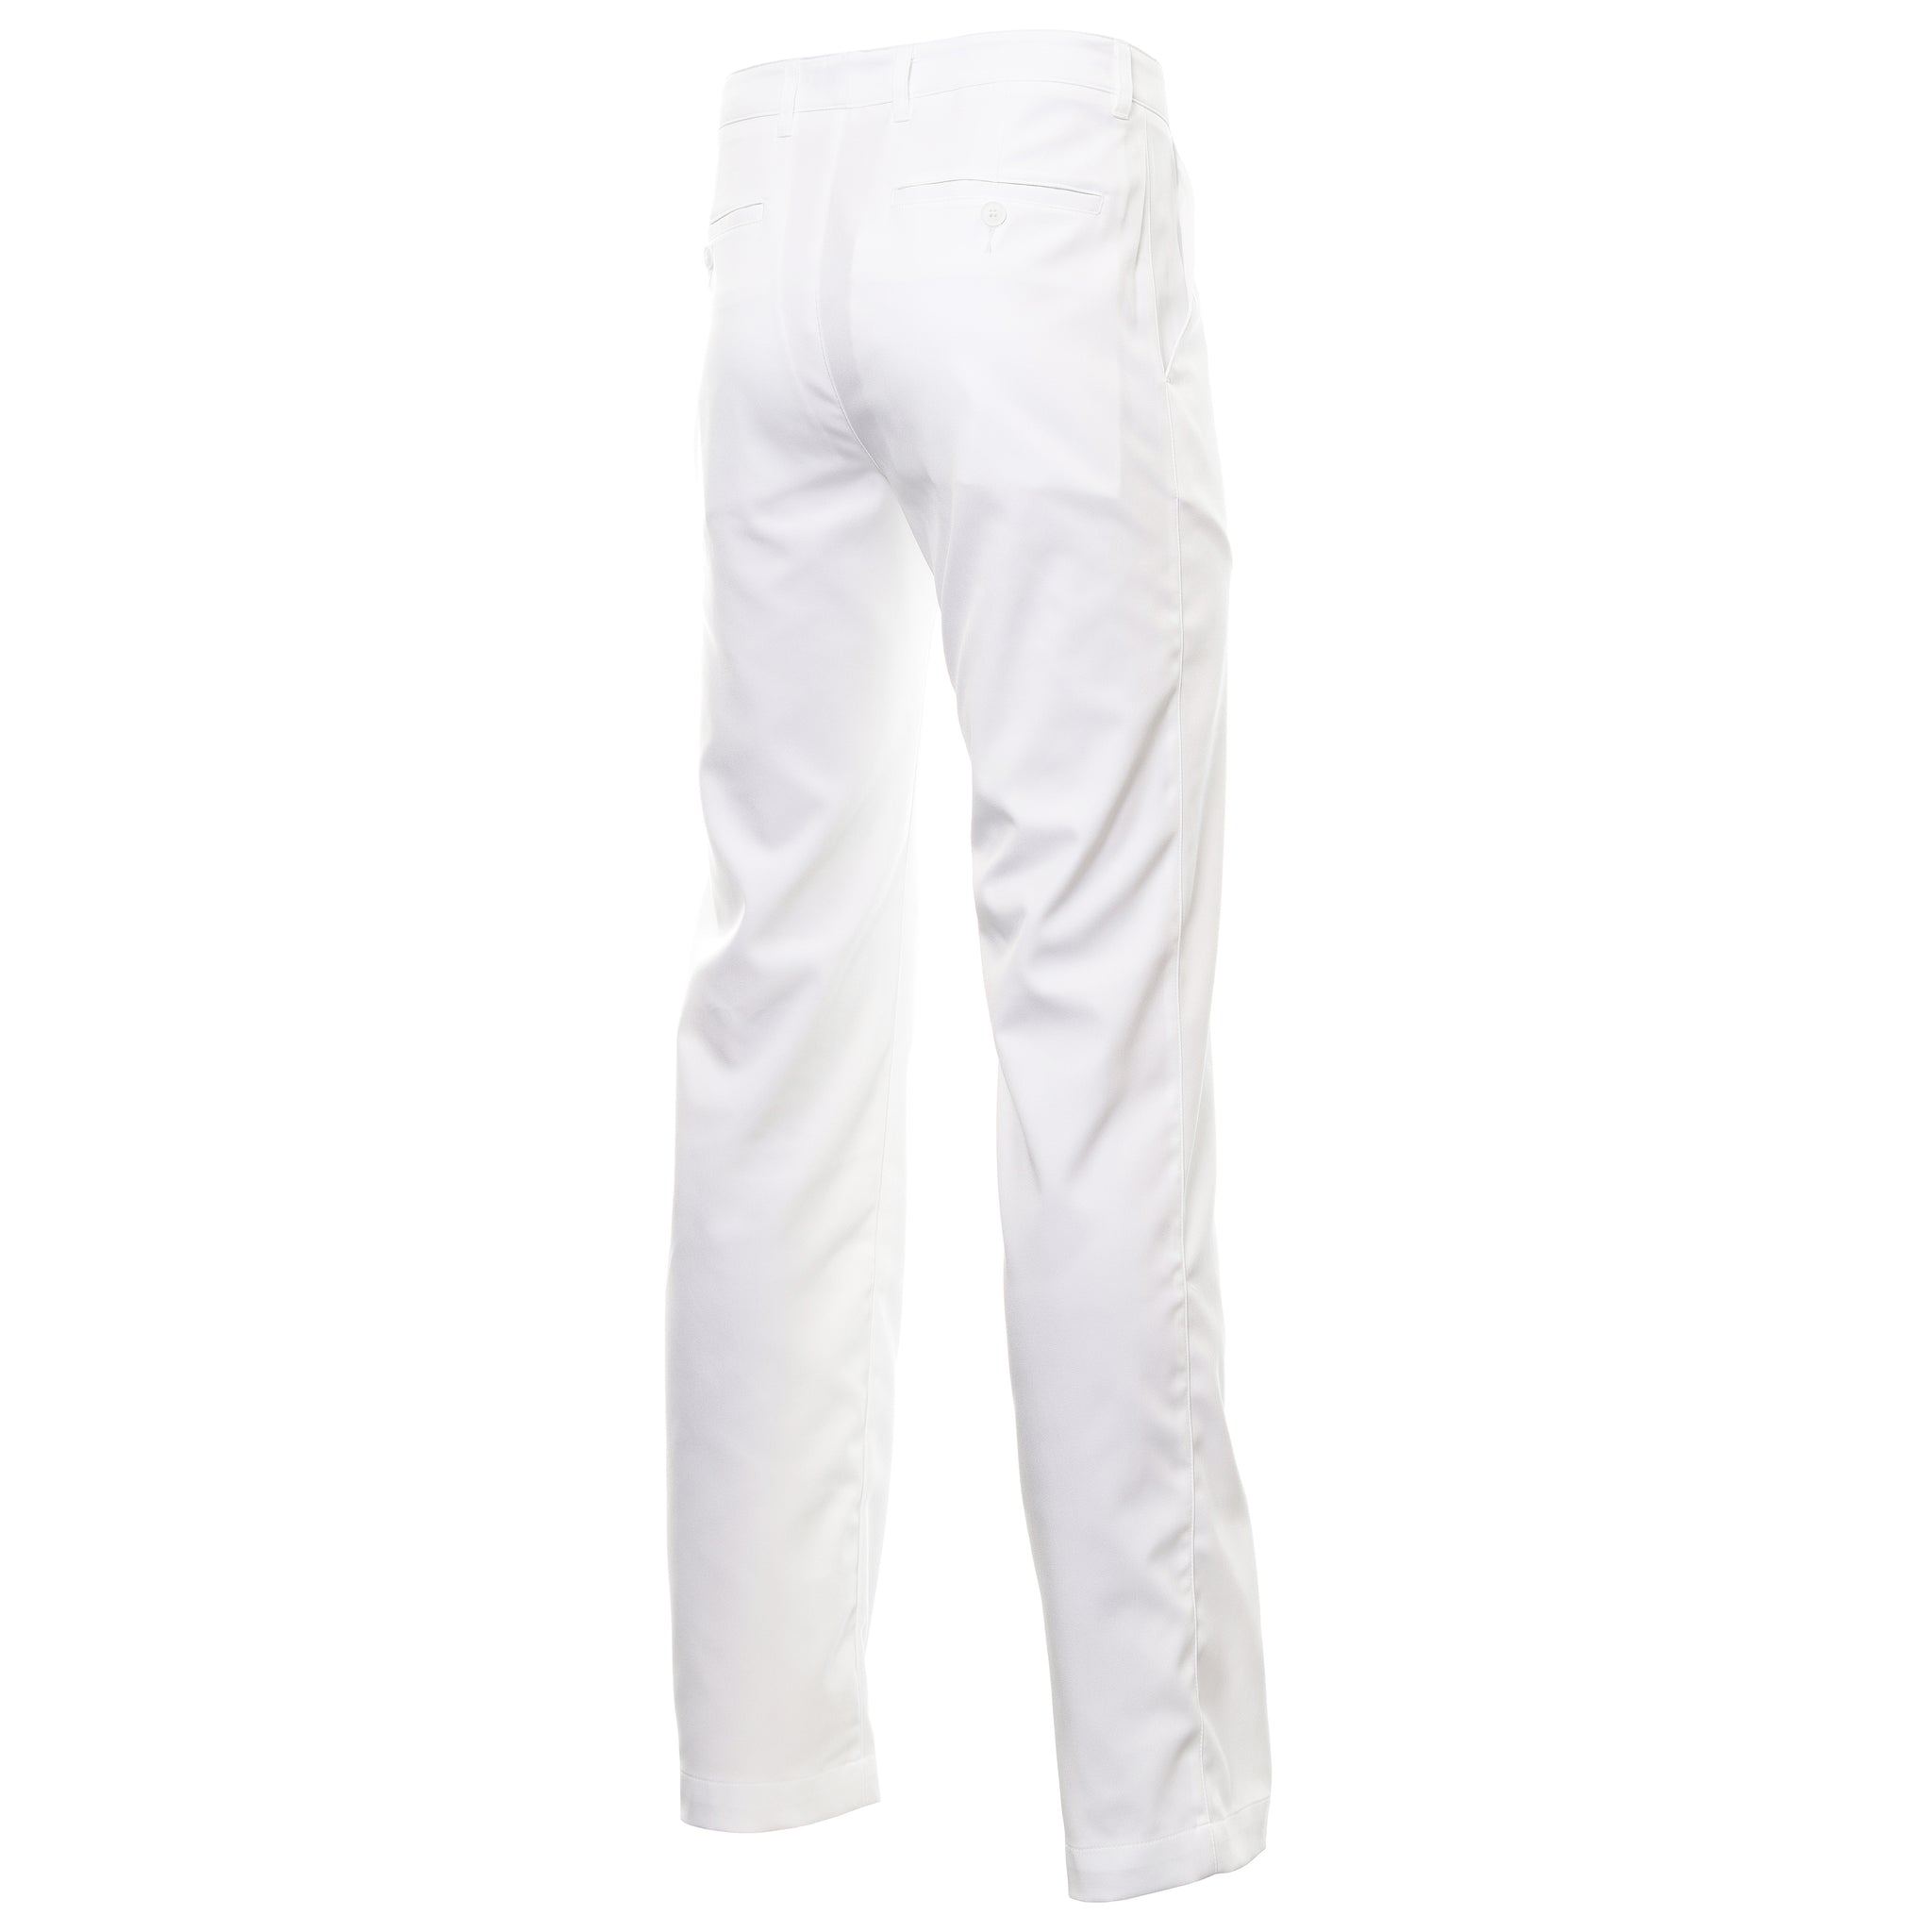 Lacoste Sport Stretch Golf Chino Pants HH3768 White 001 | Function18 ...